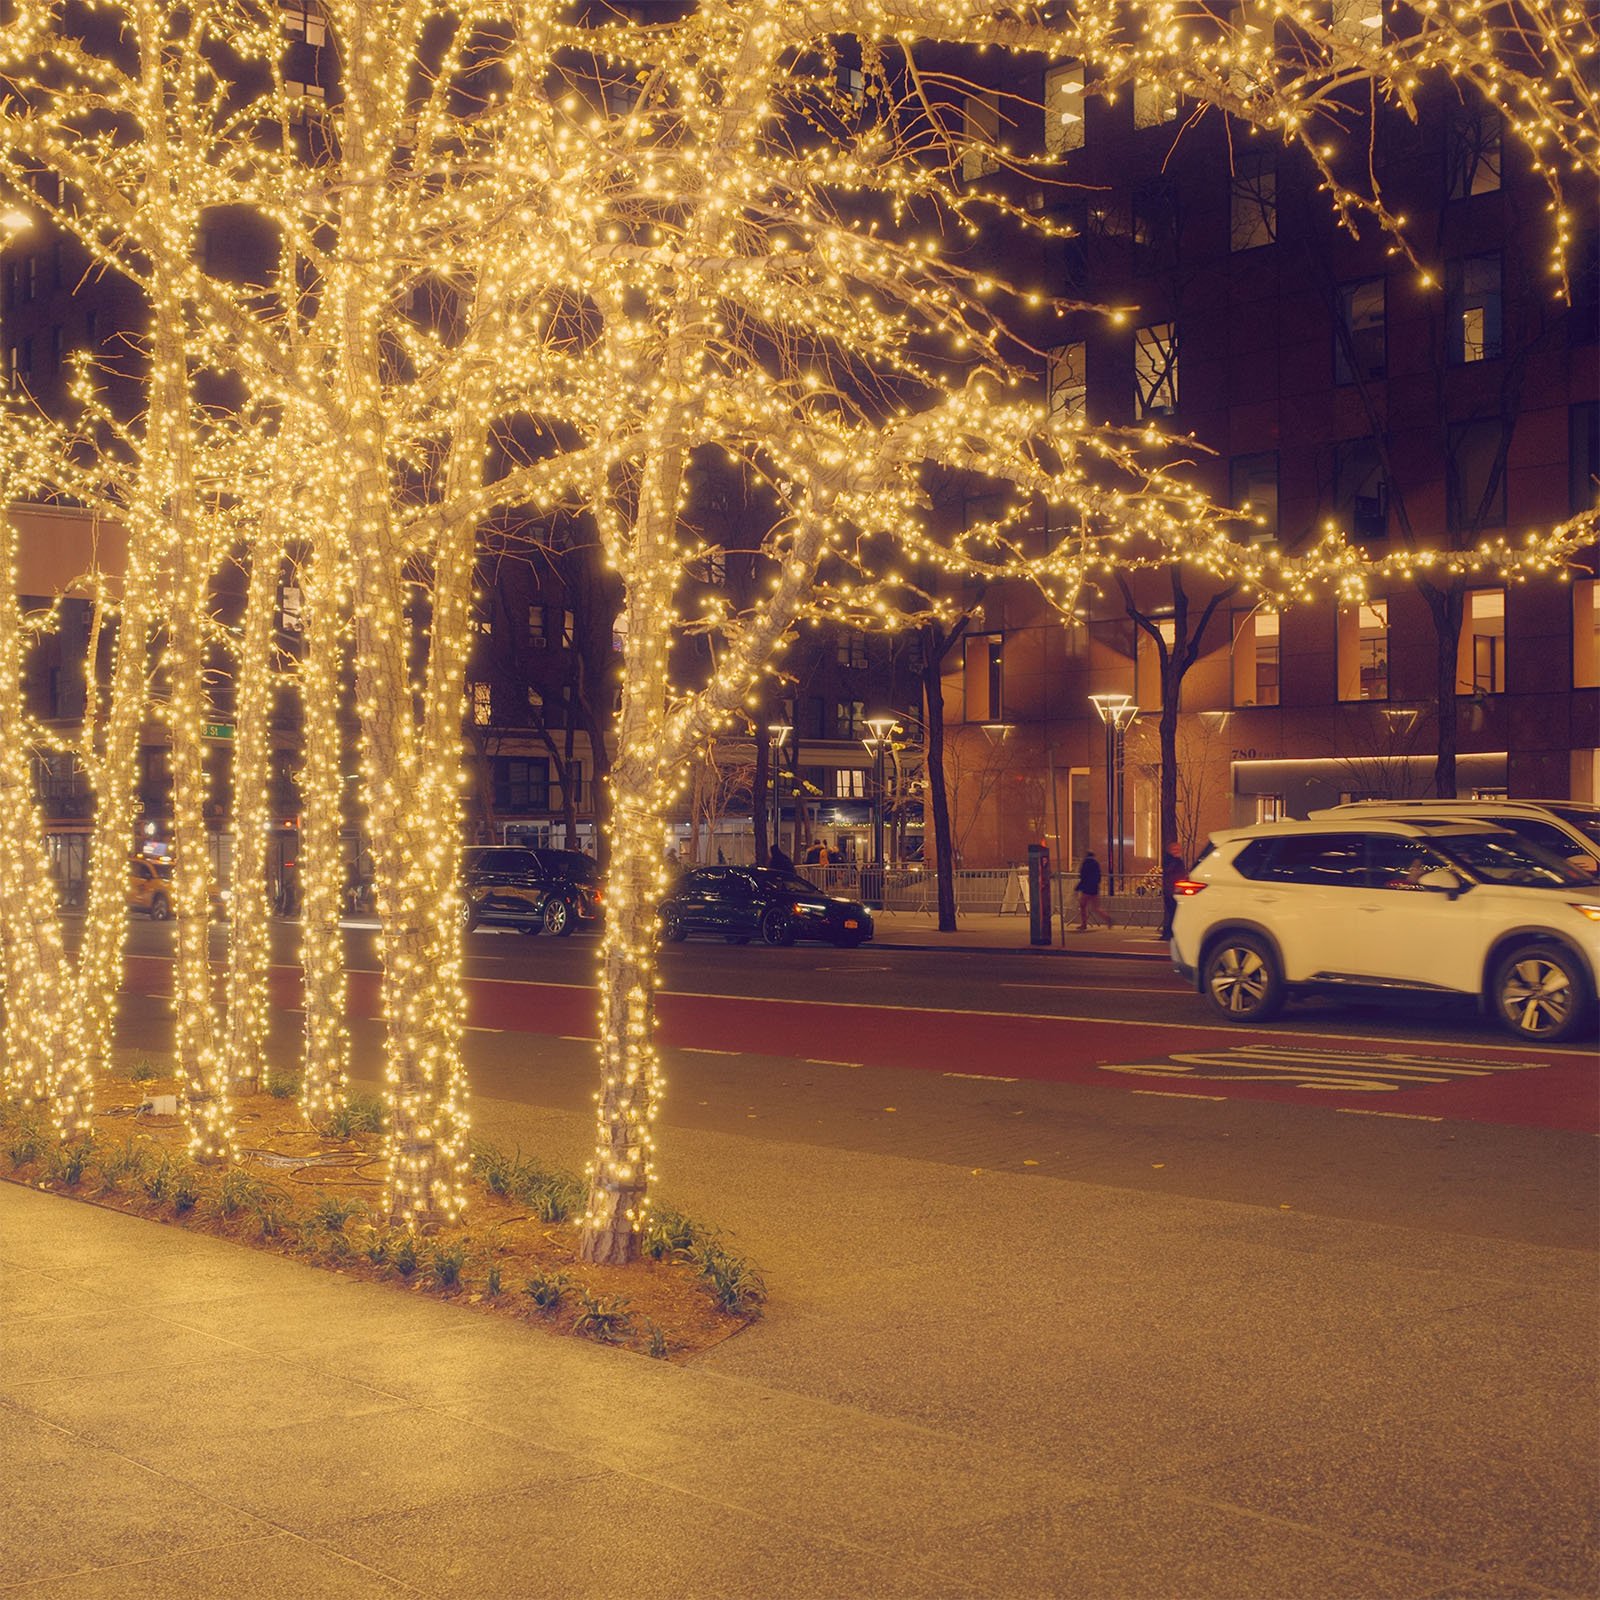 City street at night with trees wrapped in warm white string lights. Cars drive along the illuminated road, and buildings with lit windows are visible in the background. The scene has a festive and cozy atmosphere.